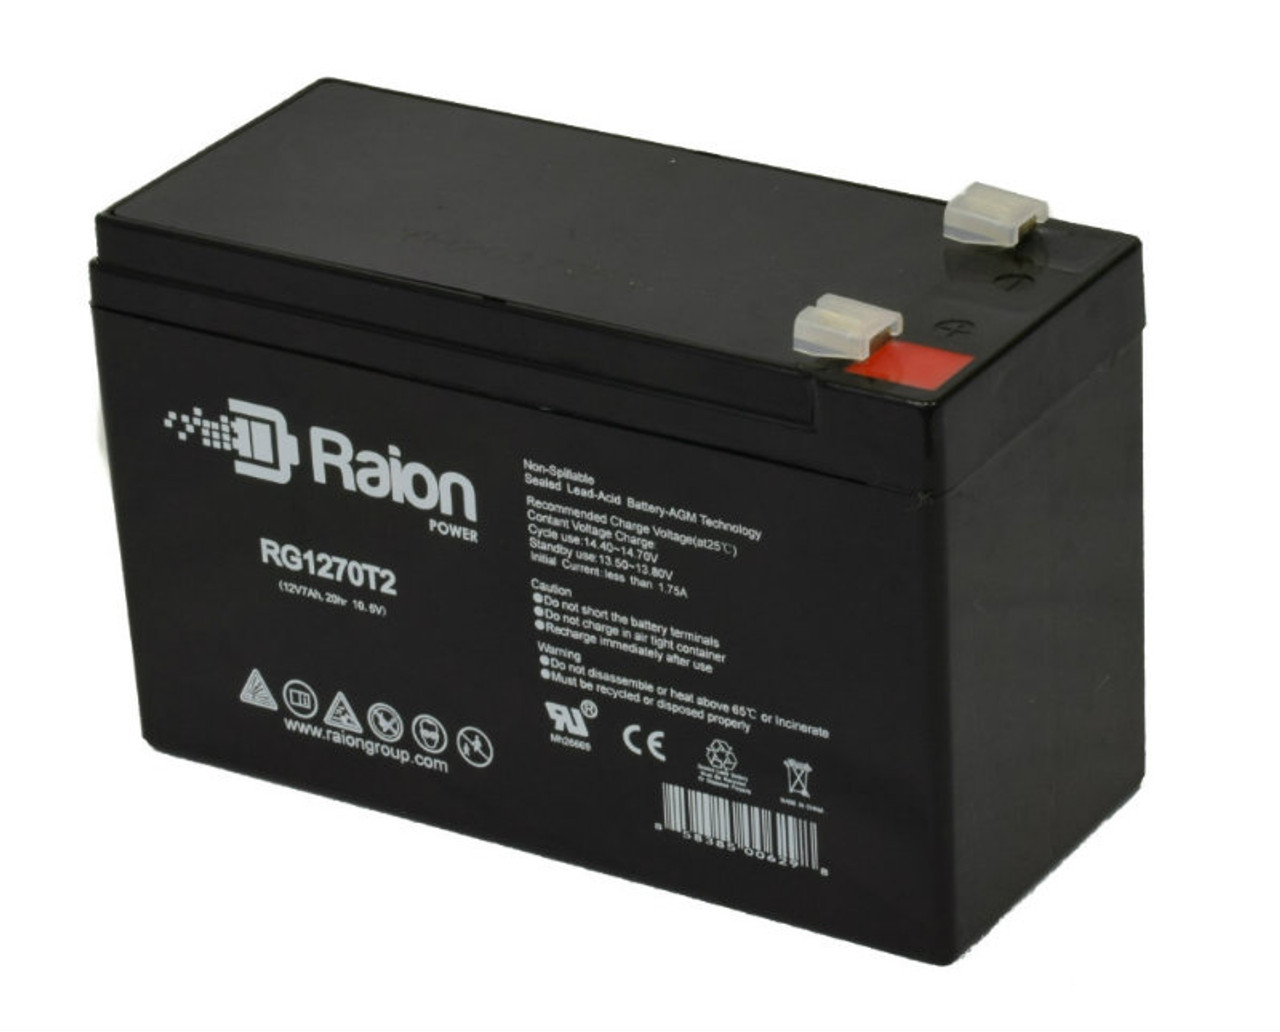 Raion Power RG1270T2 12V 7Ah Rechargeable Battery for FirstPower FP1270HR